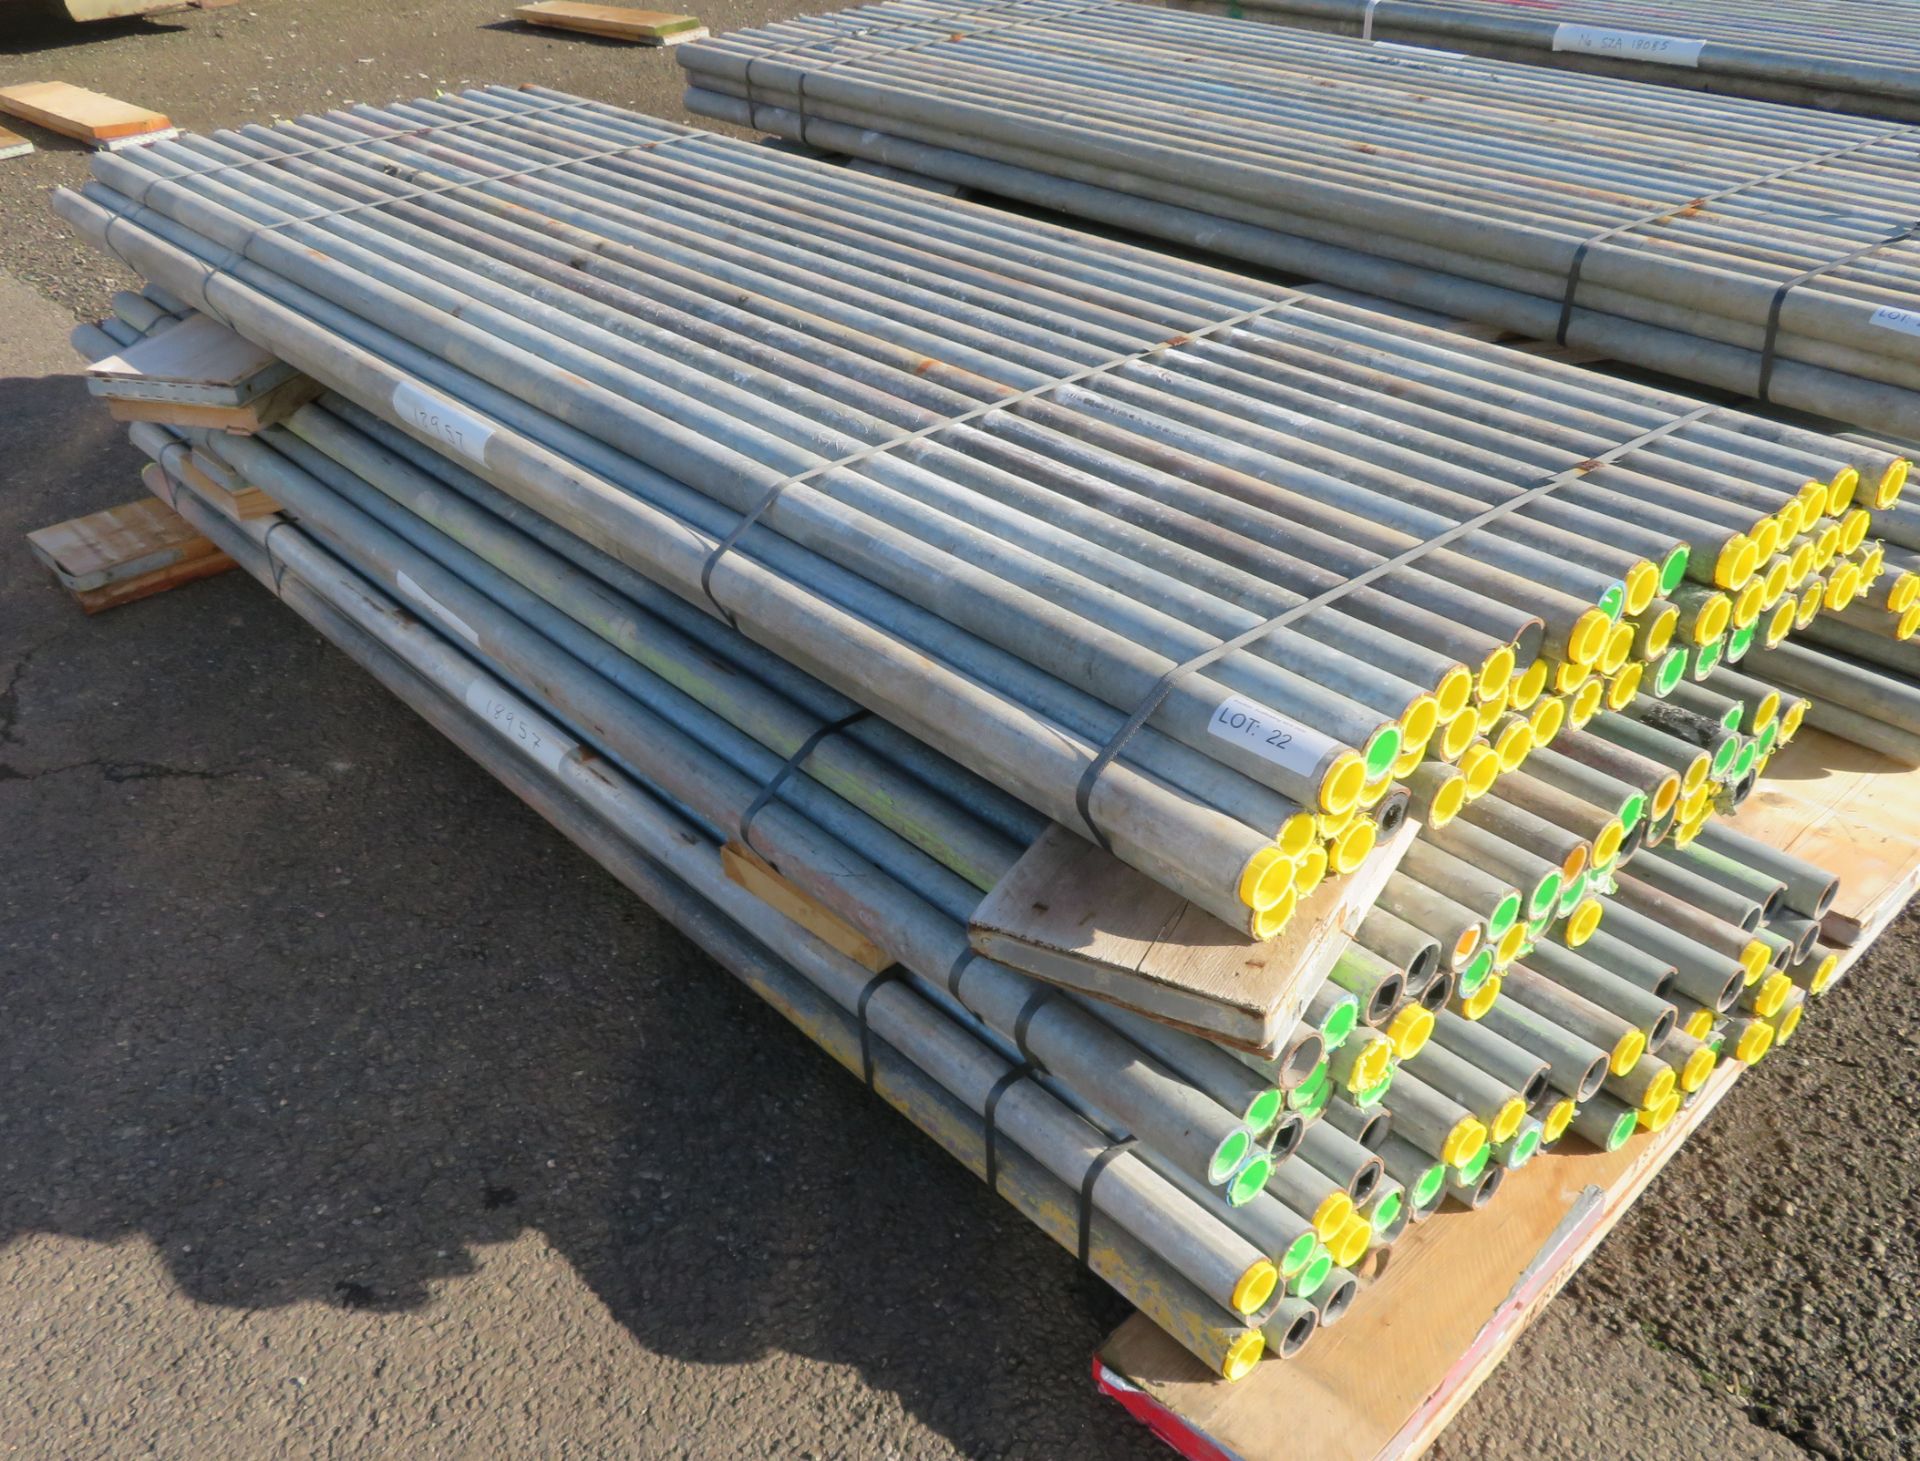 150x 8ft Galvanised Steel Scaffolding Poles 48mm Diameter x 4mm Thick. - Image 2 of 4